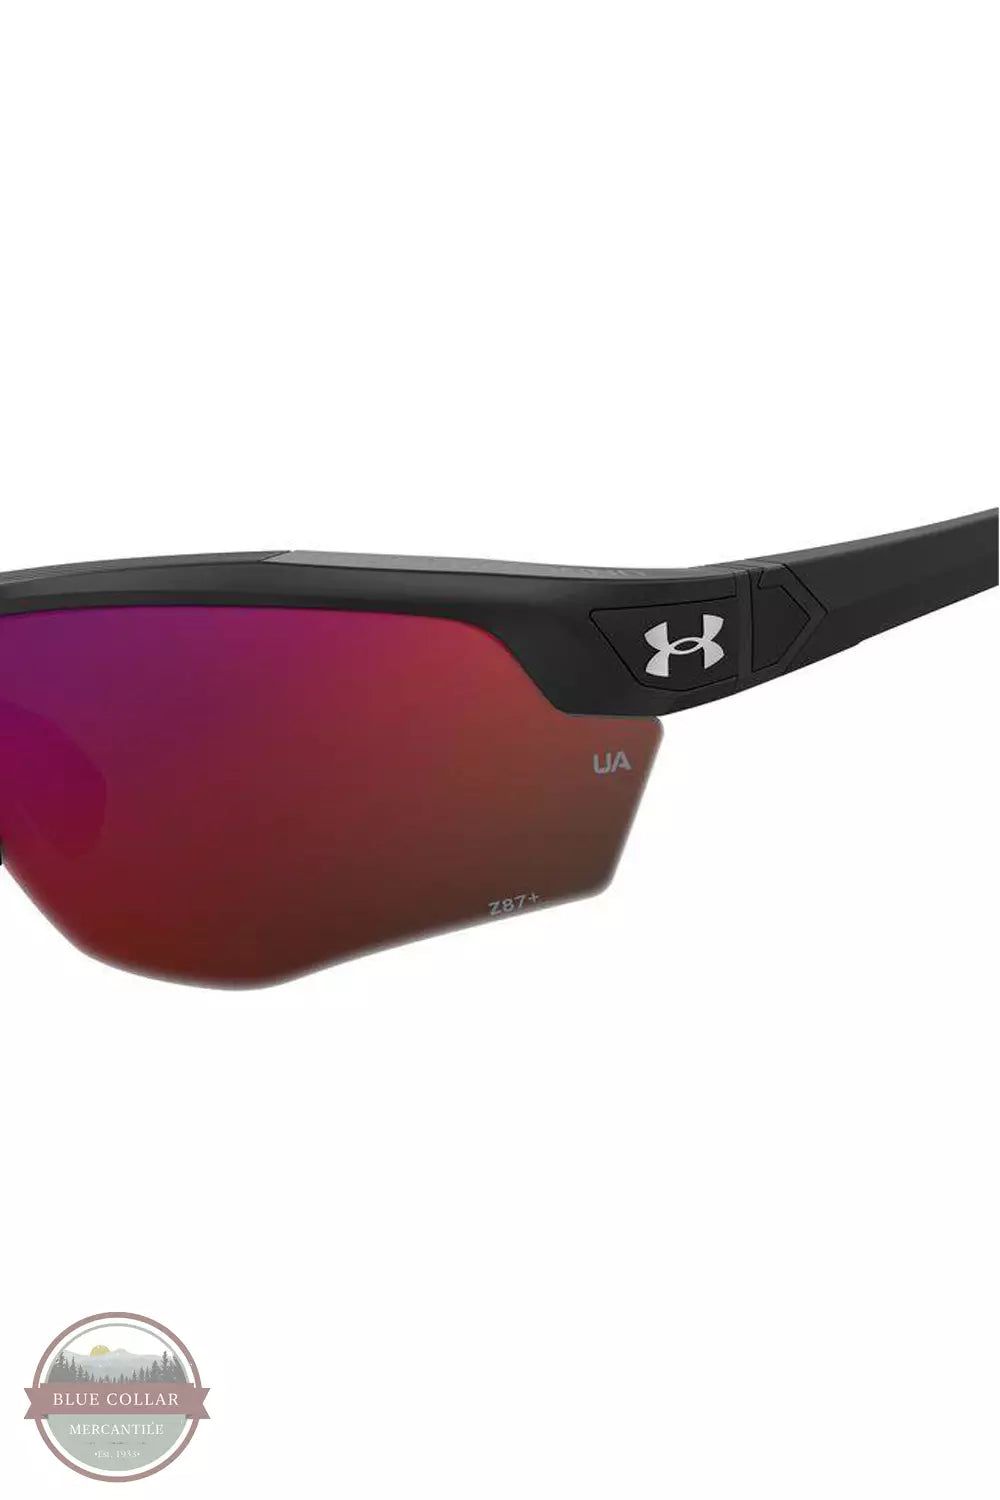 Under Armour 1381107-002 Yard Dual TUNED Baseball Sunglasses in Black / Infrared Detail View